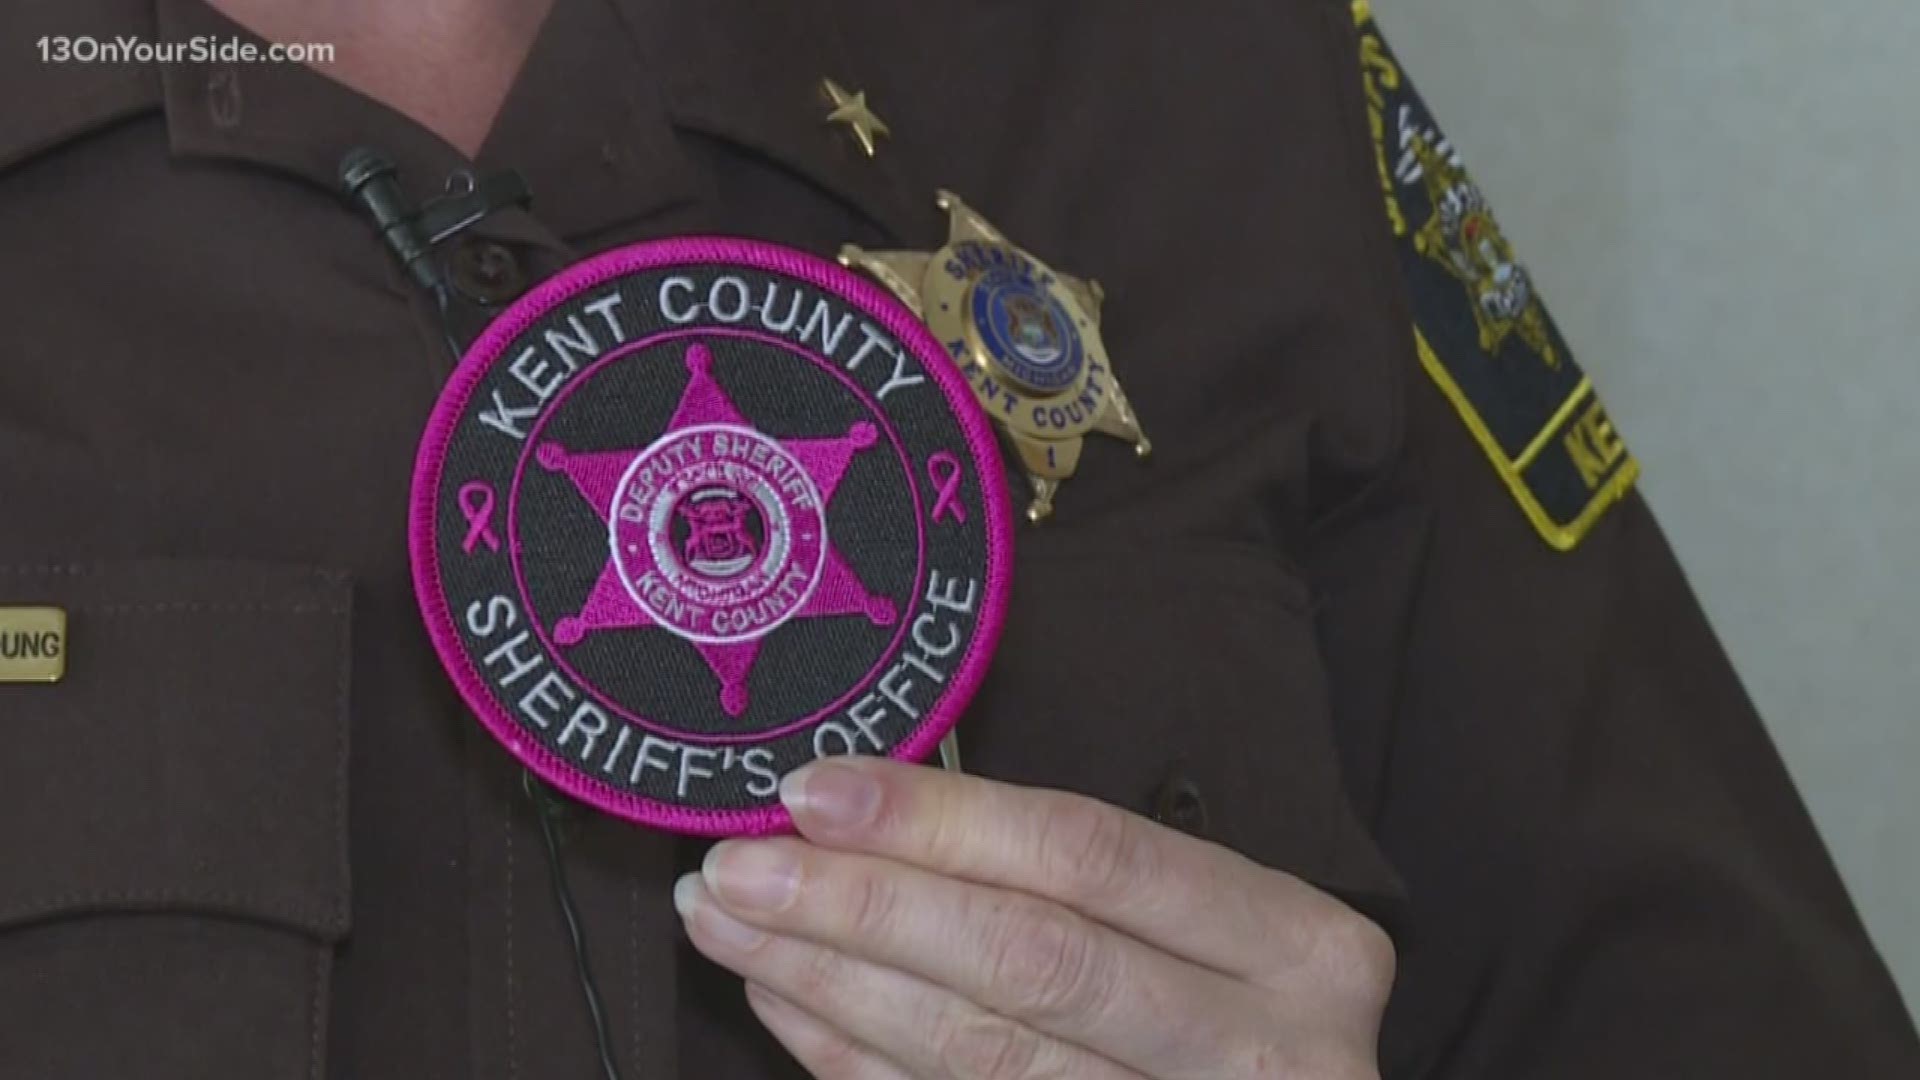 Kent County Sheriff's Office is going pink